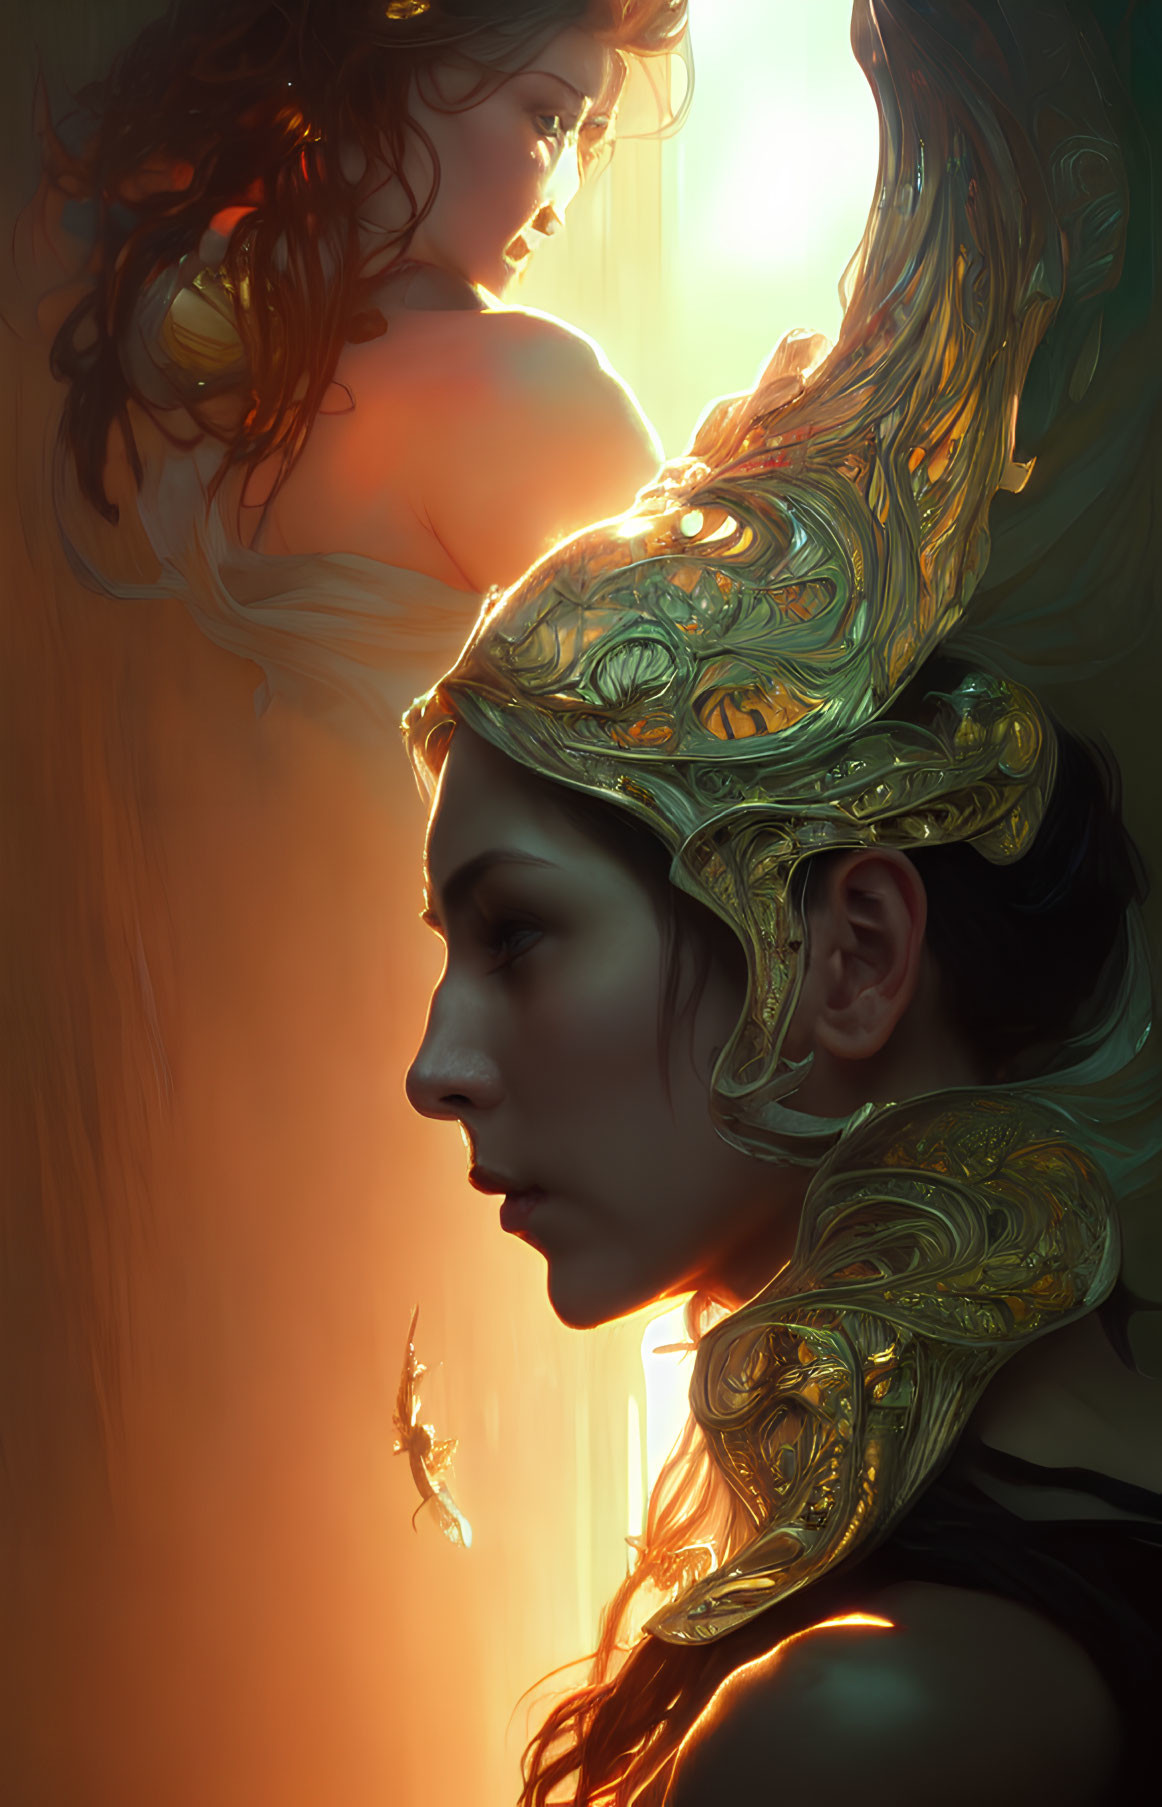 Ethereal woman with golden headpiece profiled beside winged figure